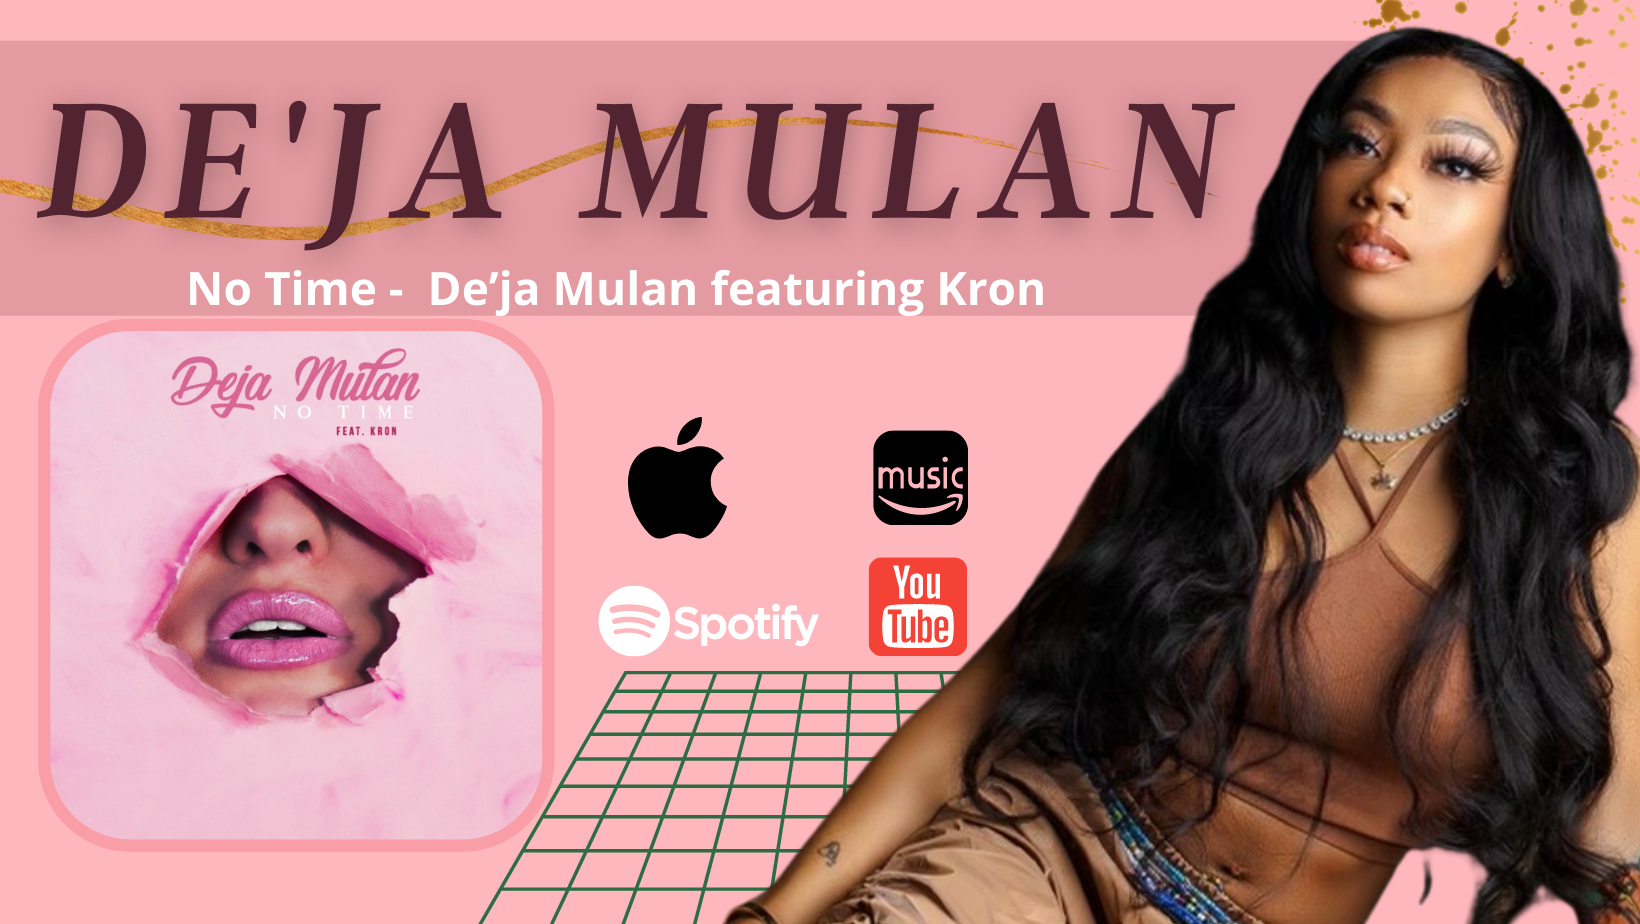 ‘De’ja Mulan’ is a Black-Asian singer/songwriter and social media influencer who drops ‘No Time’